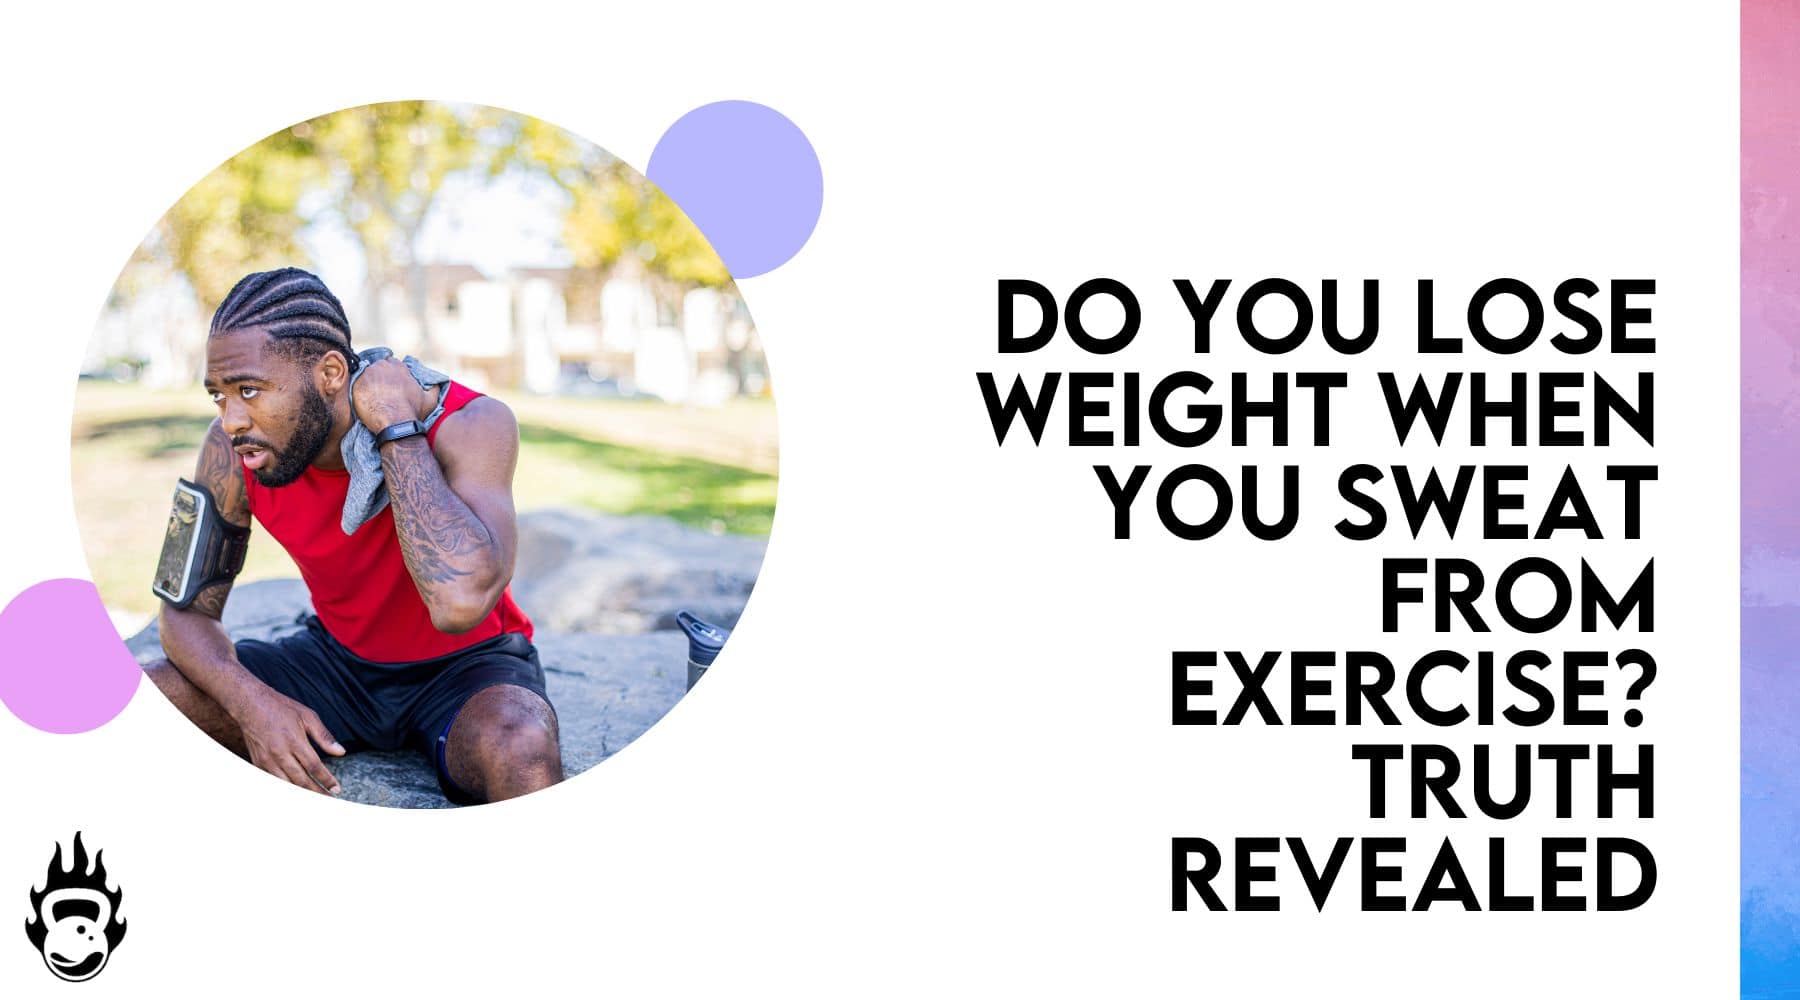 Do You Lose Weight When You Sweat From Exercise? Truth Revealed